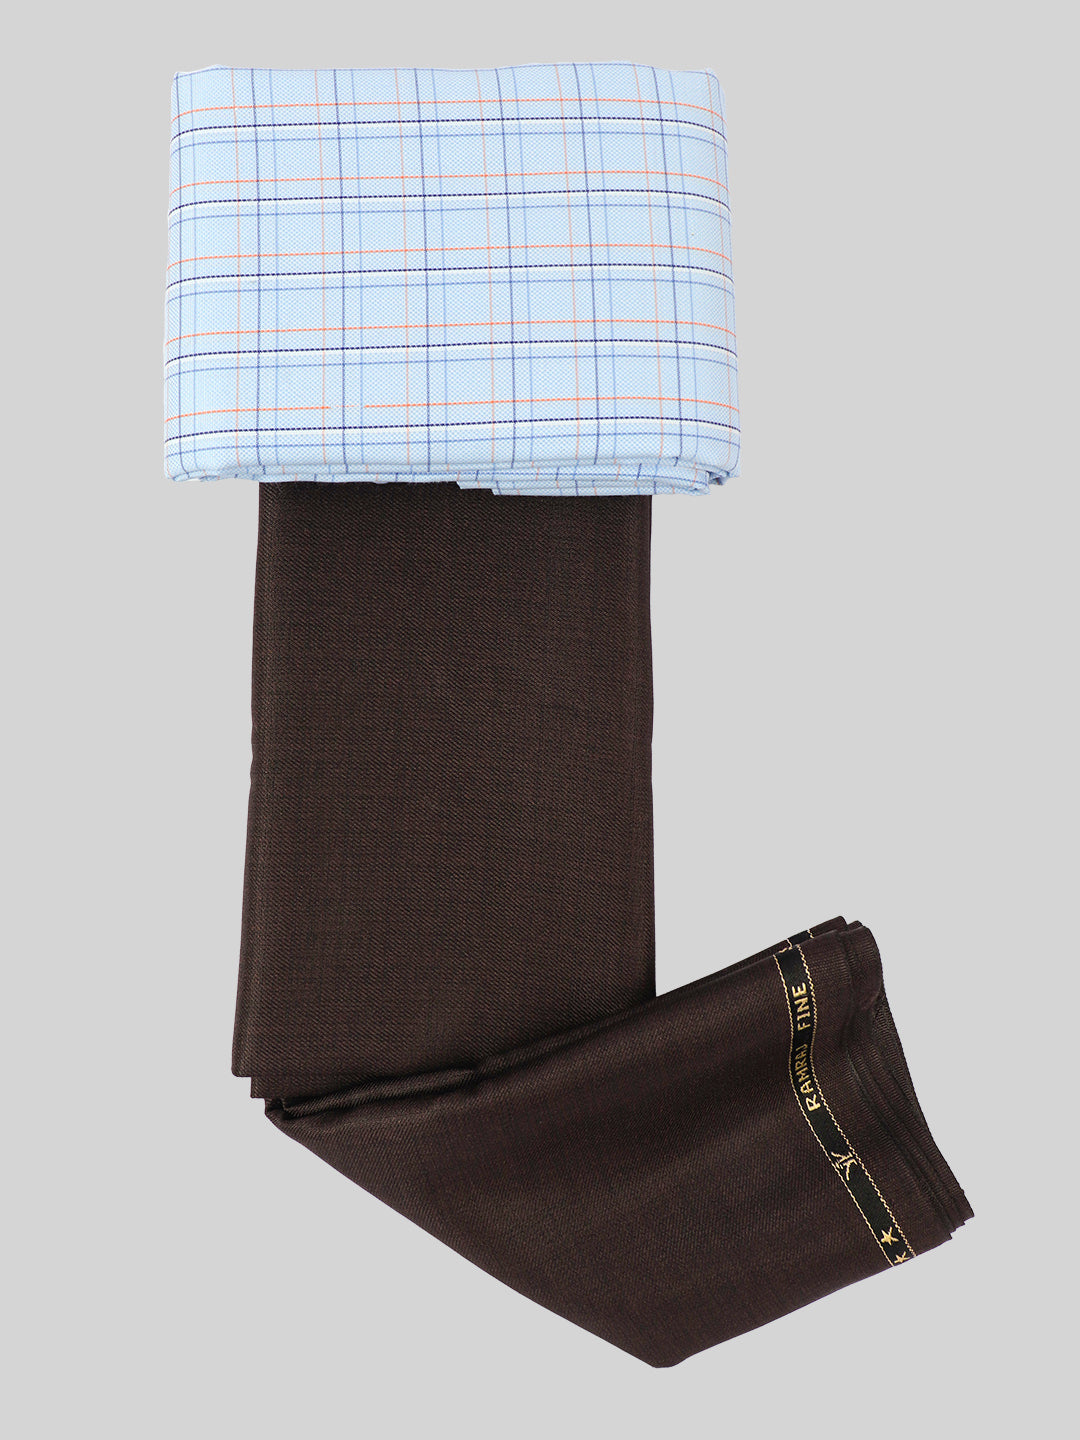 Rich Cotton Checked Light Blue With Brown Colour Shirting & Suiting  Gift Box Combo ME142